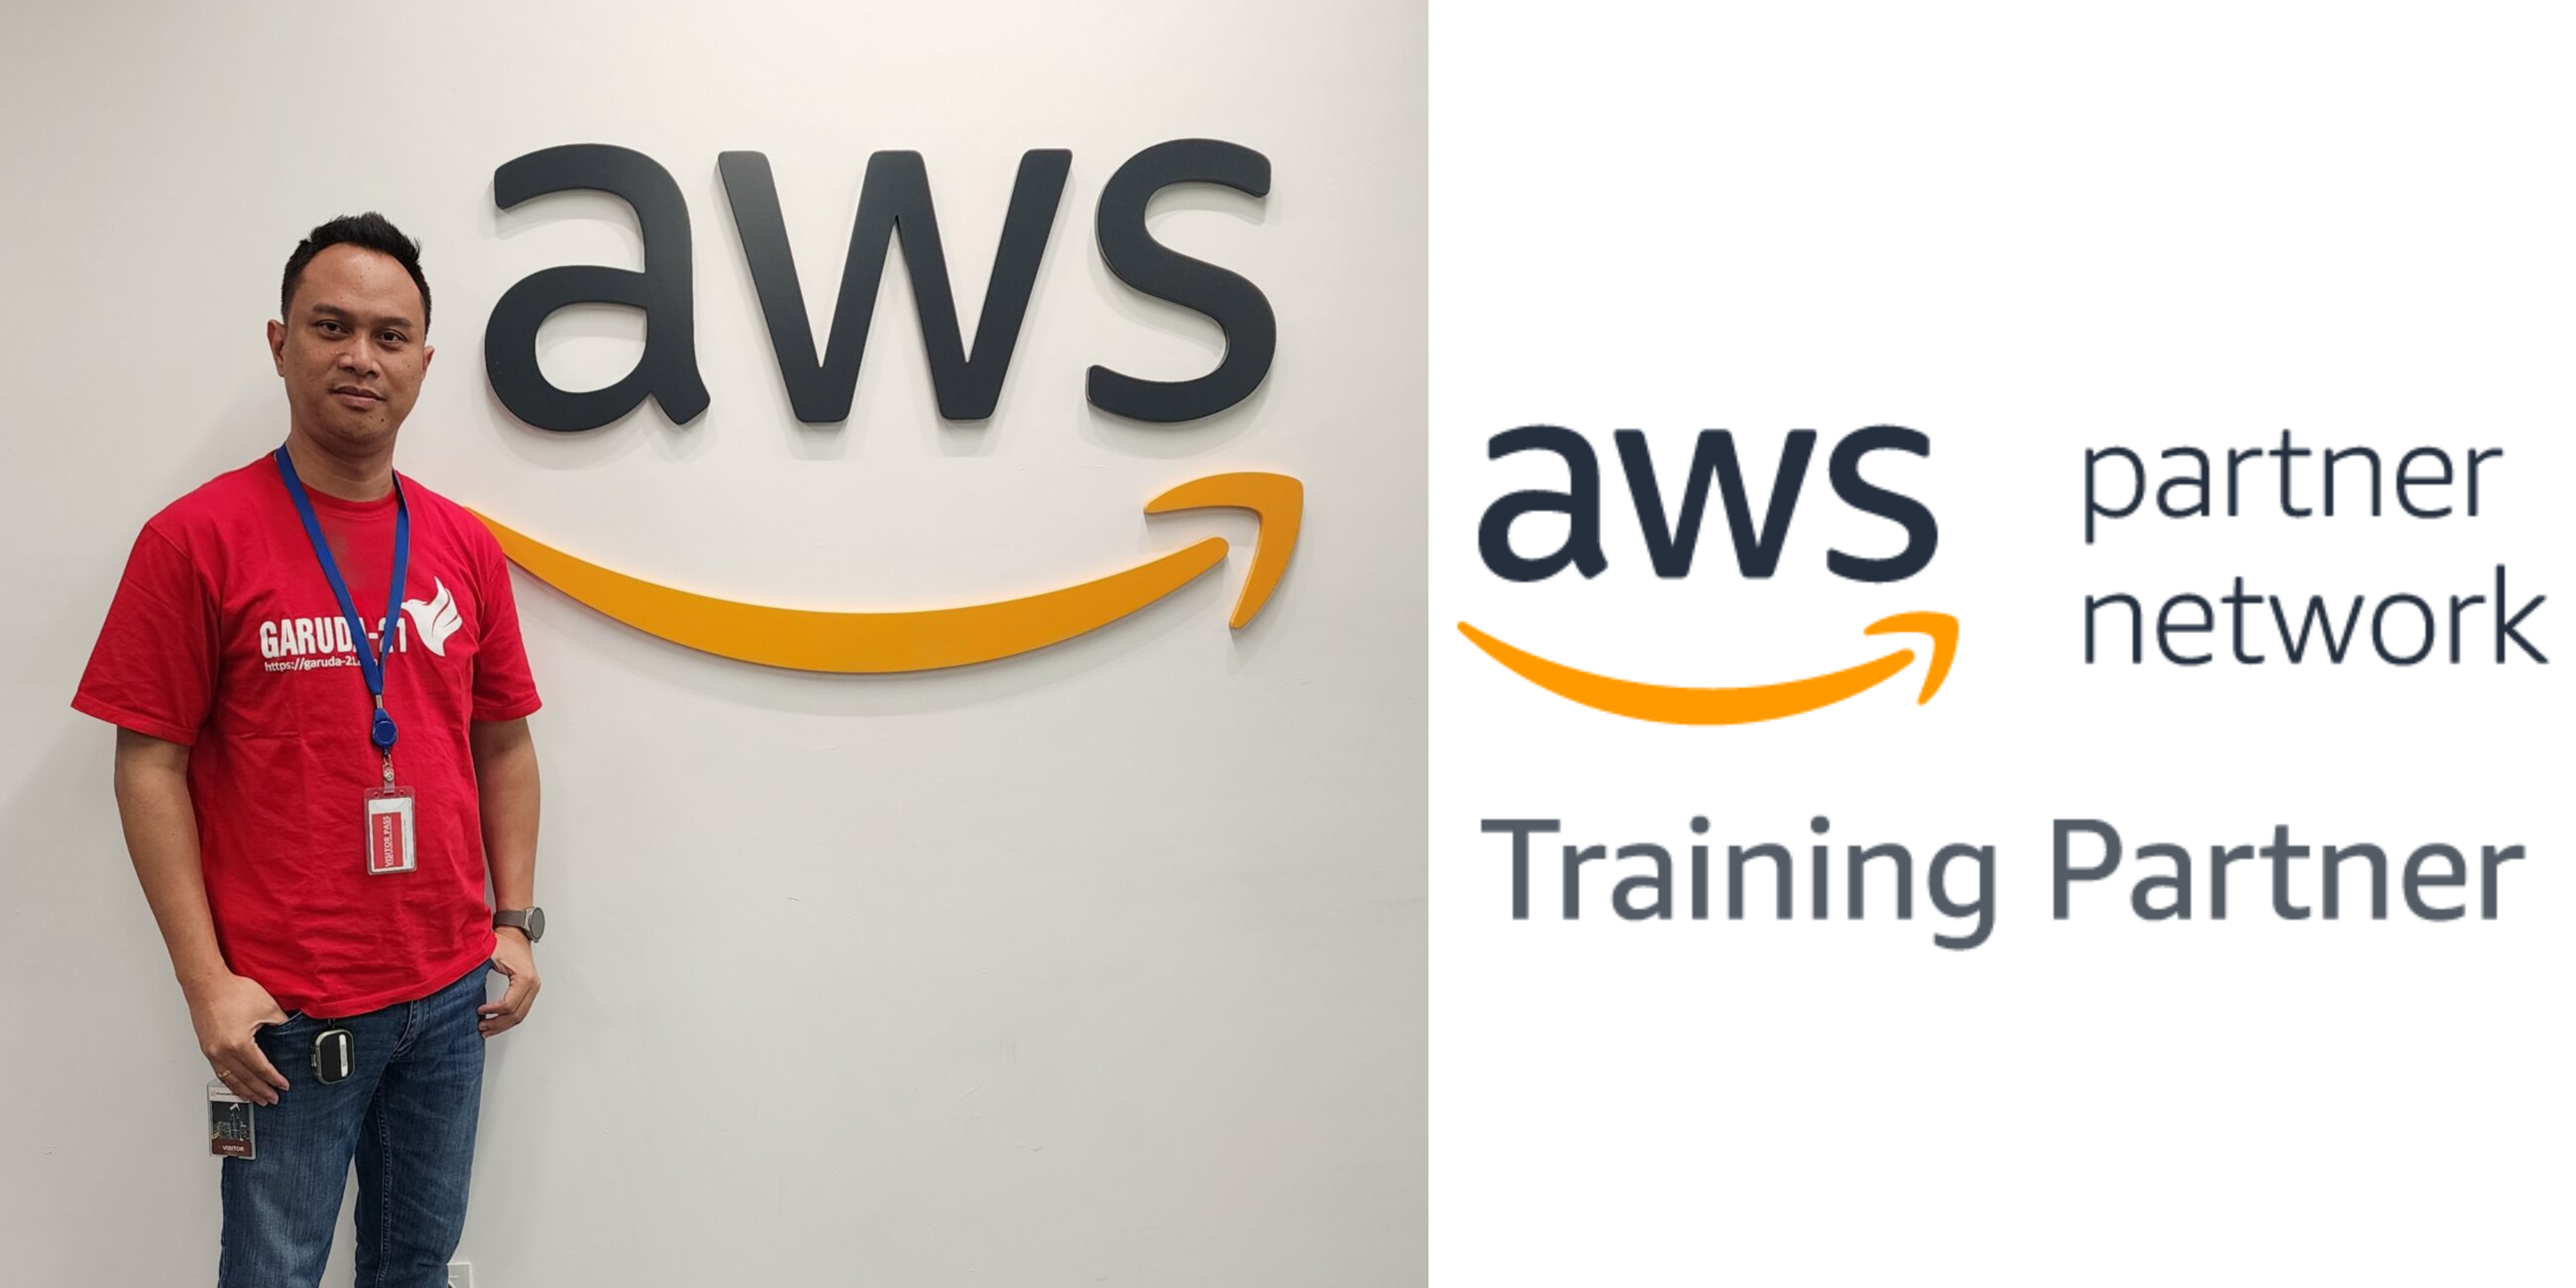 Partnering with AWS